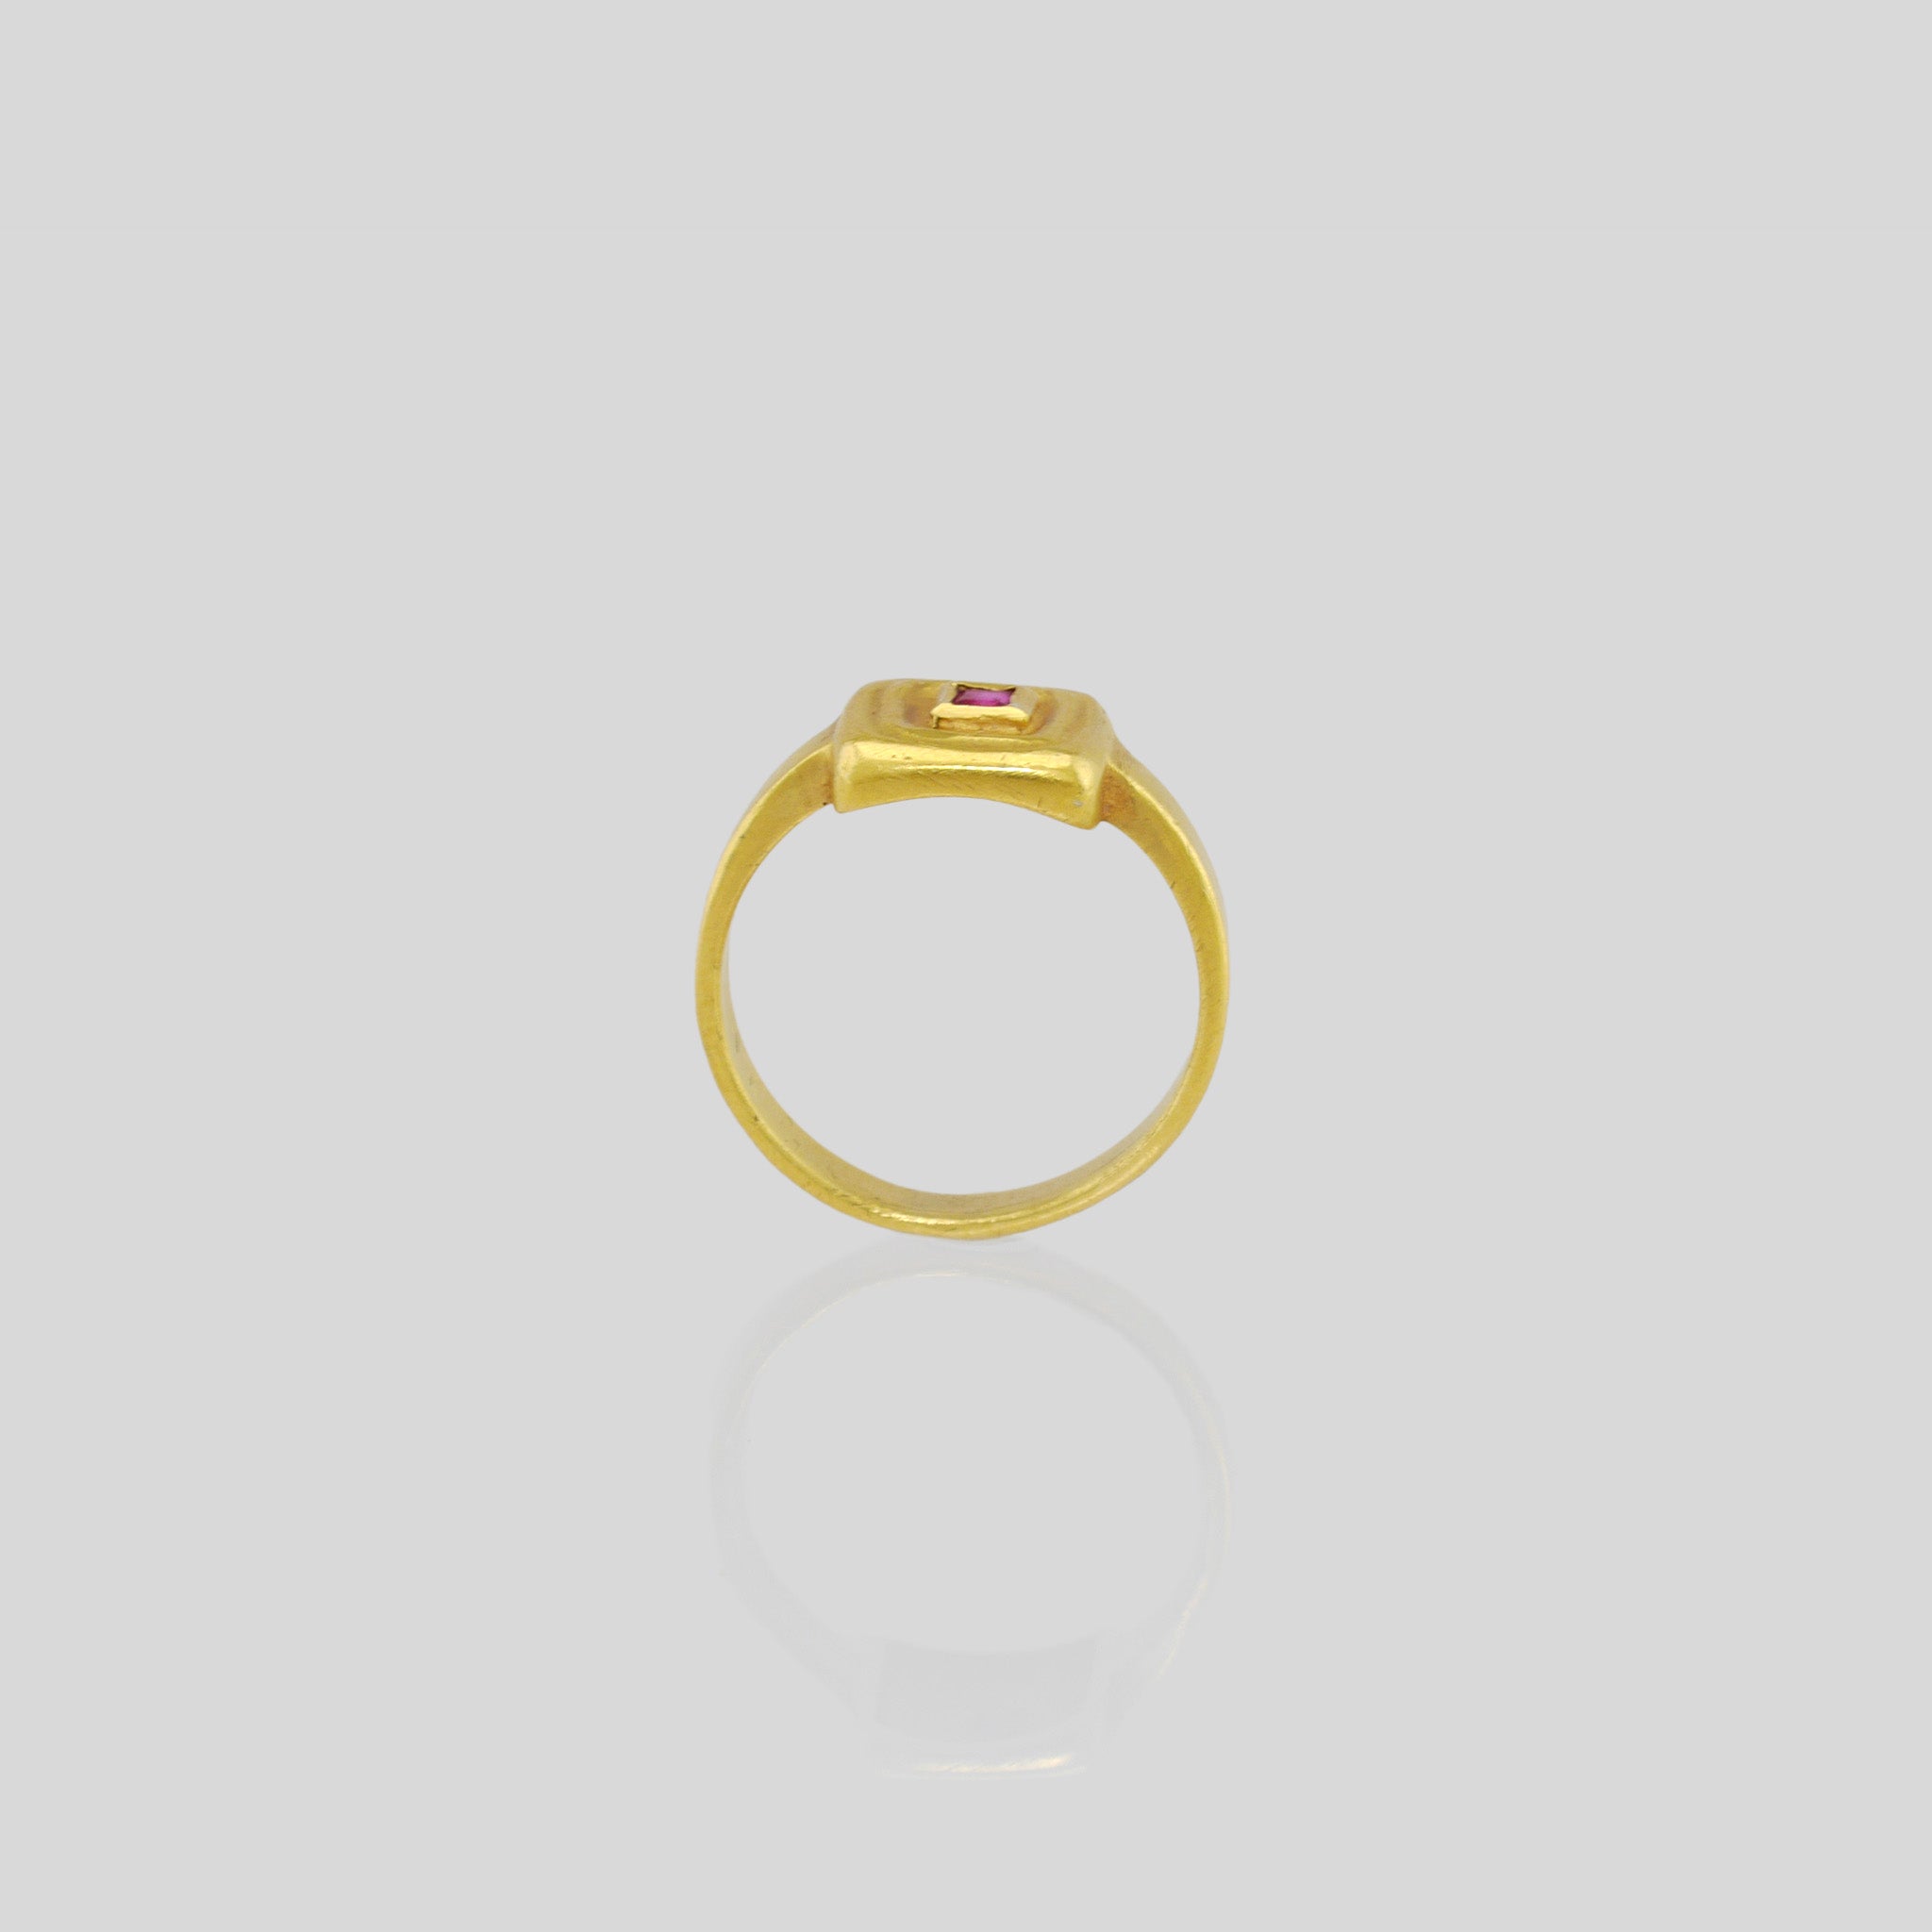 side view of Handcrafted 18k Gold ring featuring a square Ruby set atop a square surface, evoking the ancient Egyptian era's golden jewelry of the Pharaohs.